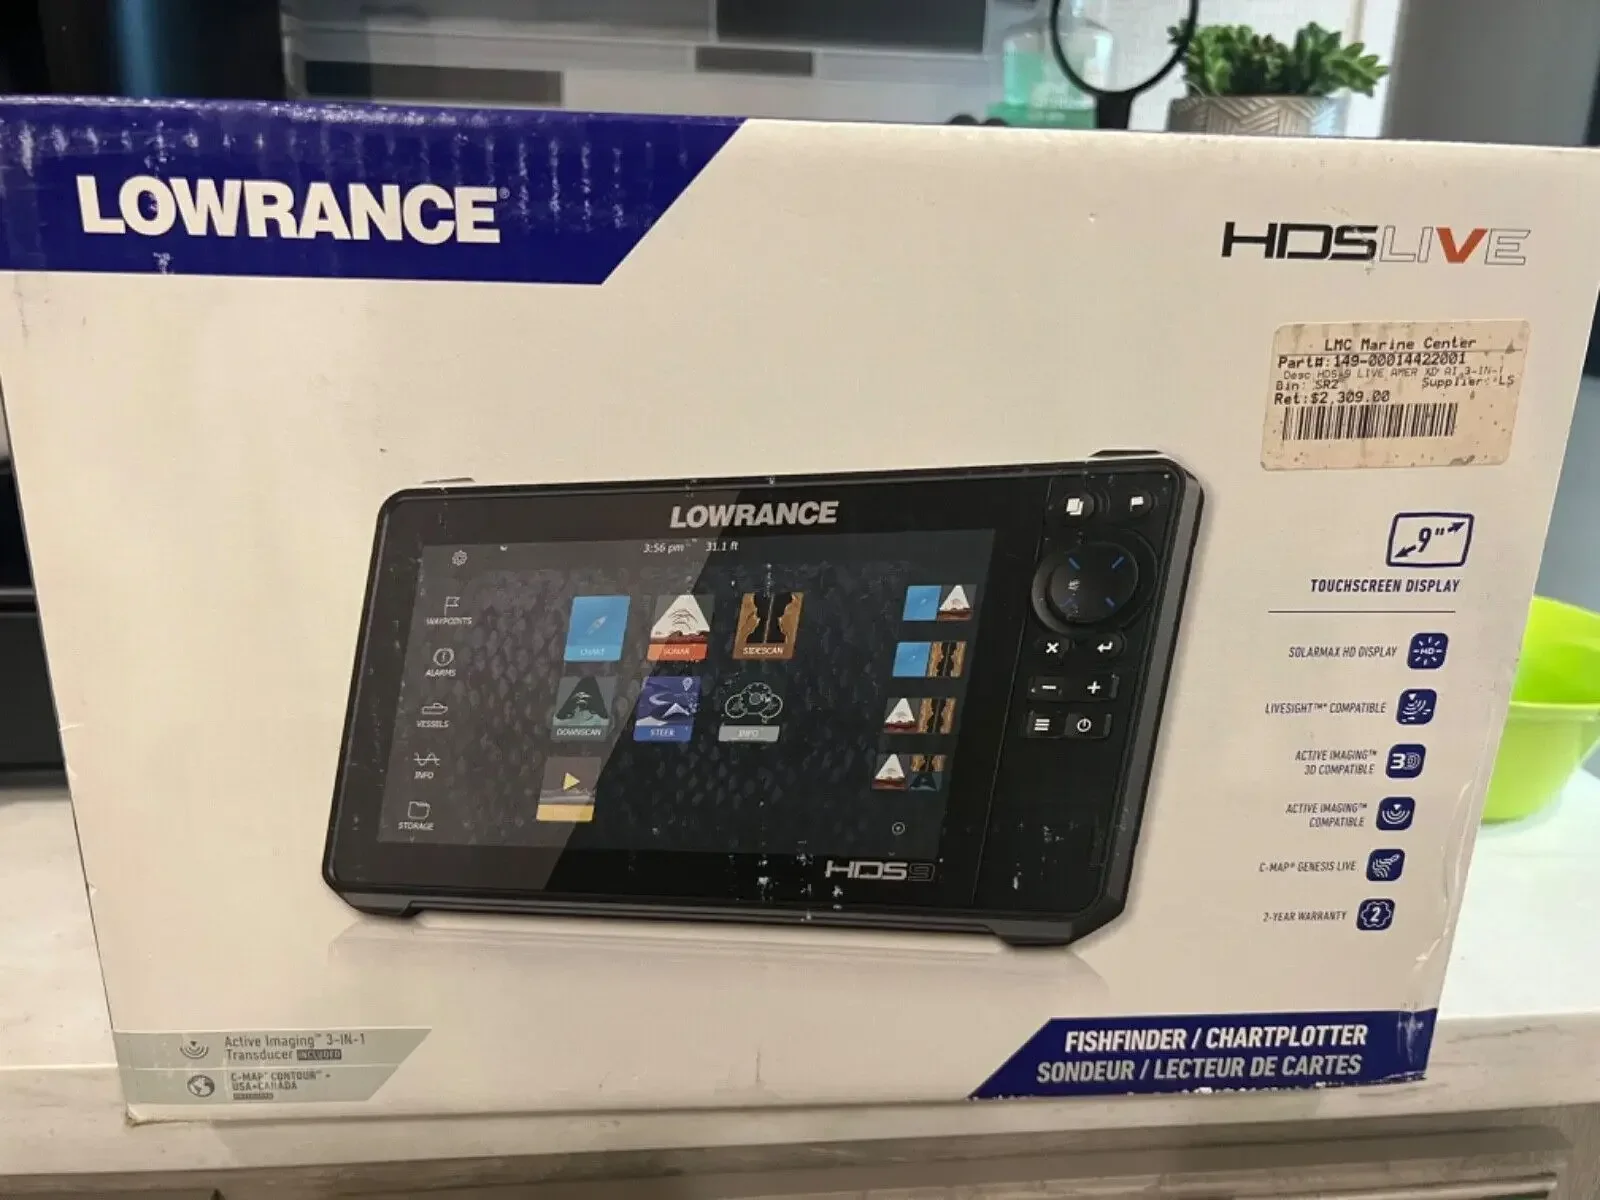 

HOT SALES FOR HDS-16 LIVE ACTIVE 12 Ti2-12- inch IMAGING 3-IN-1 TRANSOM Lowrance MOUNT & C-MAP PRO CHART Fish Finders New